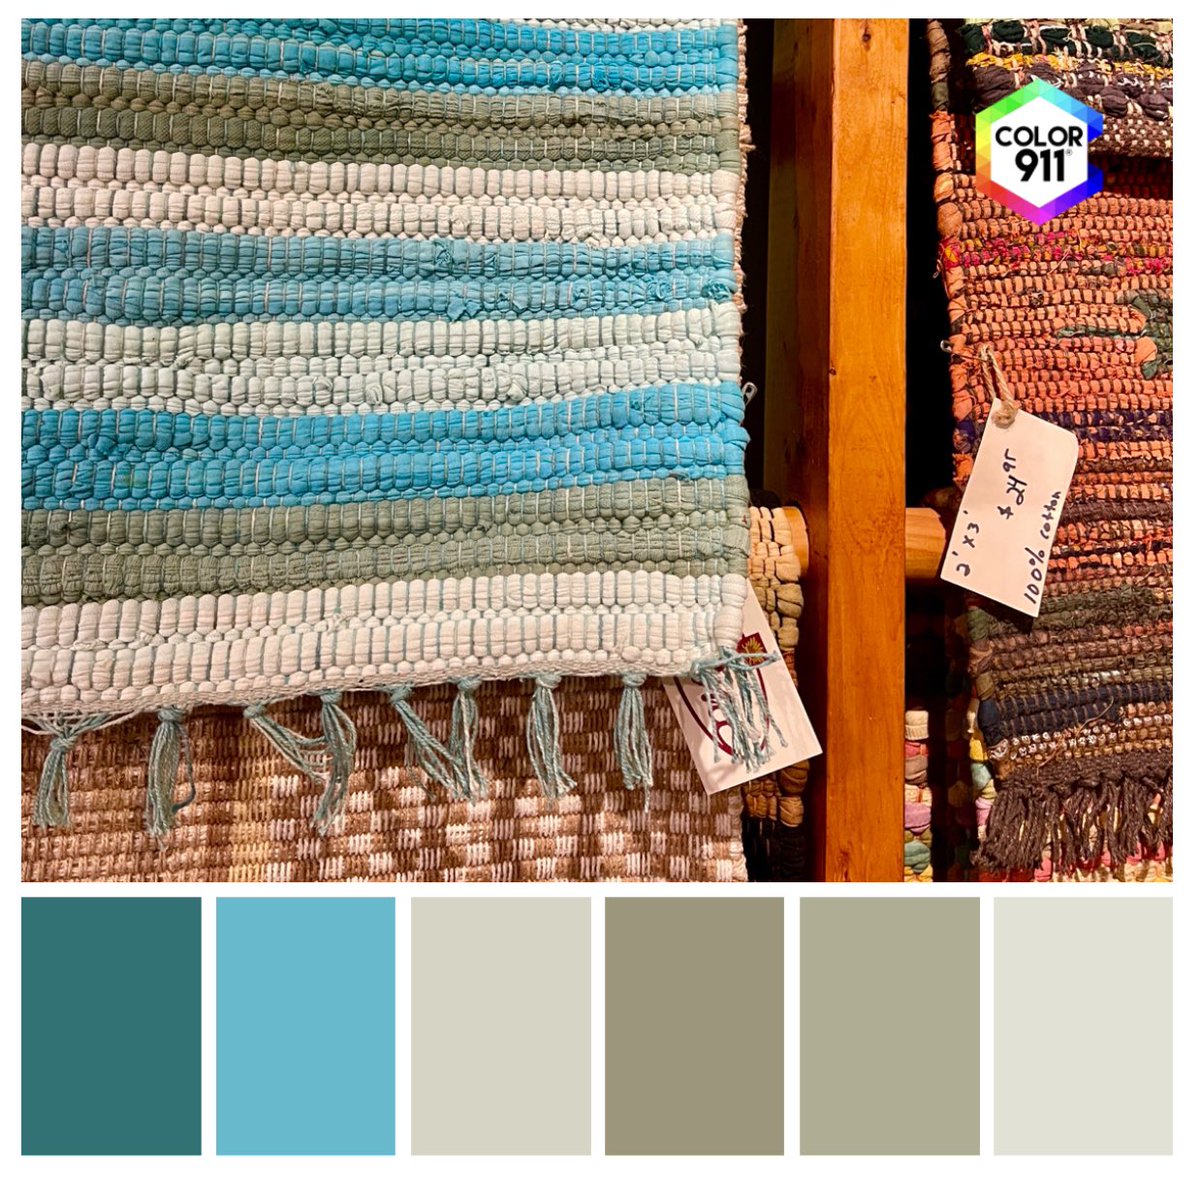 When you’re looking for a rug with a specific #color in it, capture the #colors of what you find. So easy, I think you’ll love it! #Decorating your home just got much easier! Try it out: Color911.com #homedesign #homedecor #diy #diydecor @HouseBeautiful @goodhousemag